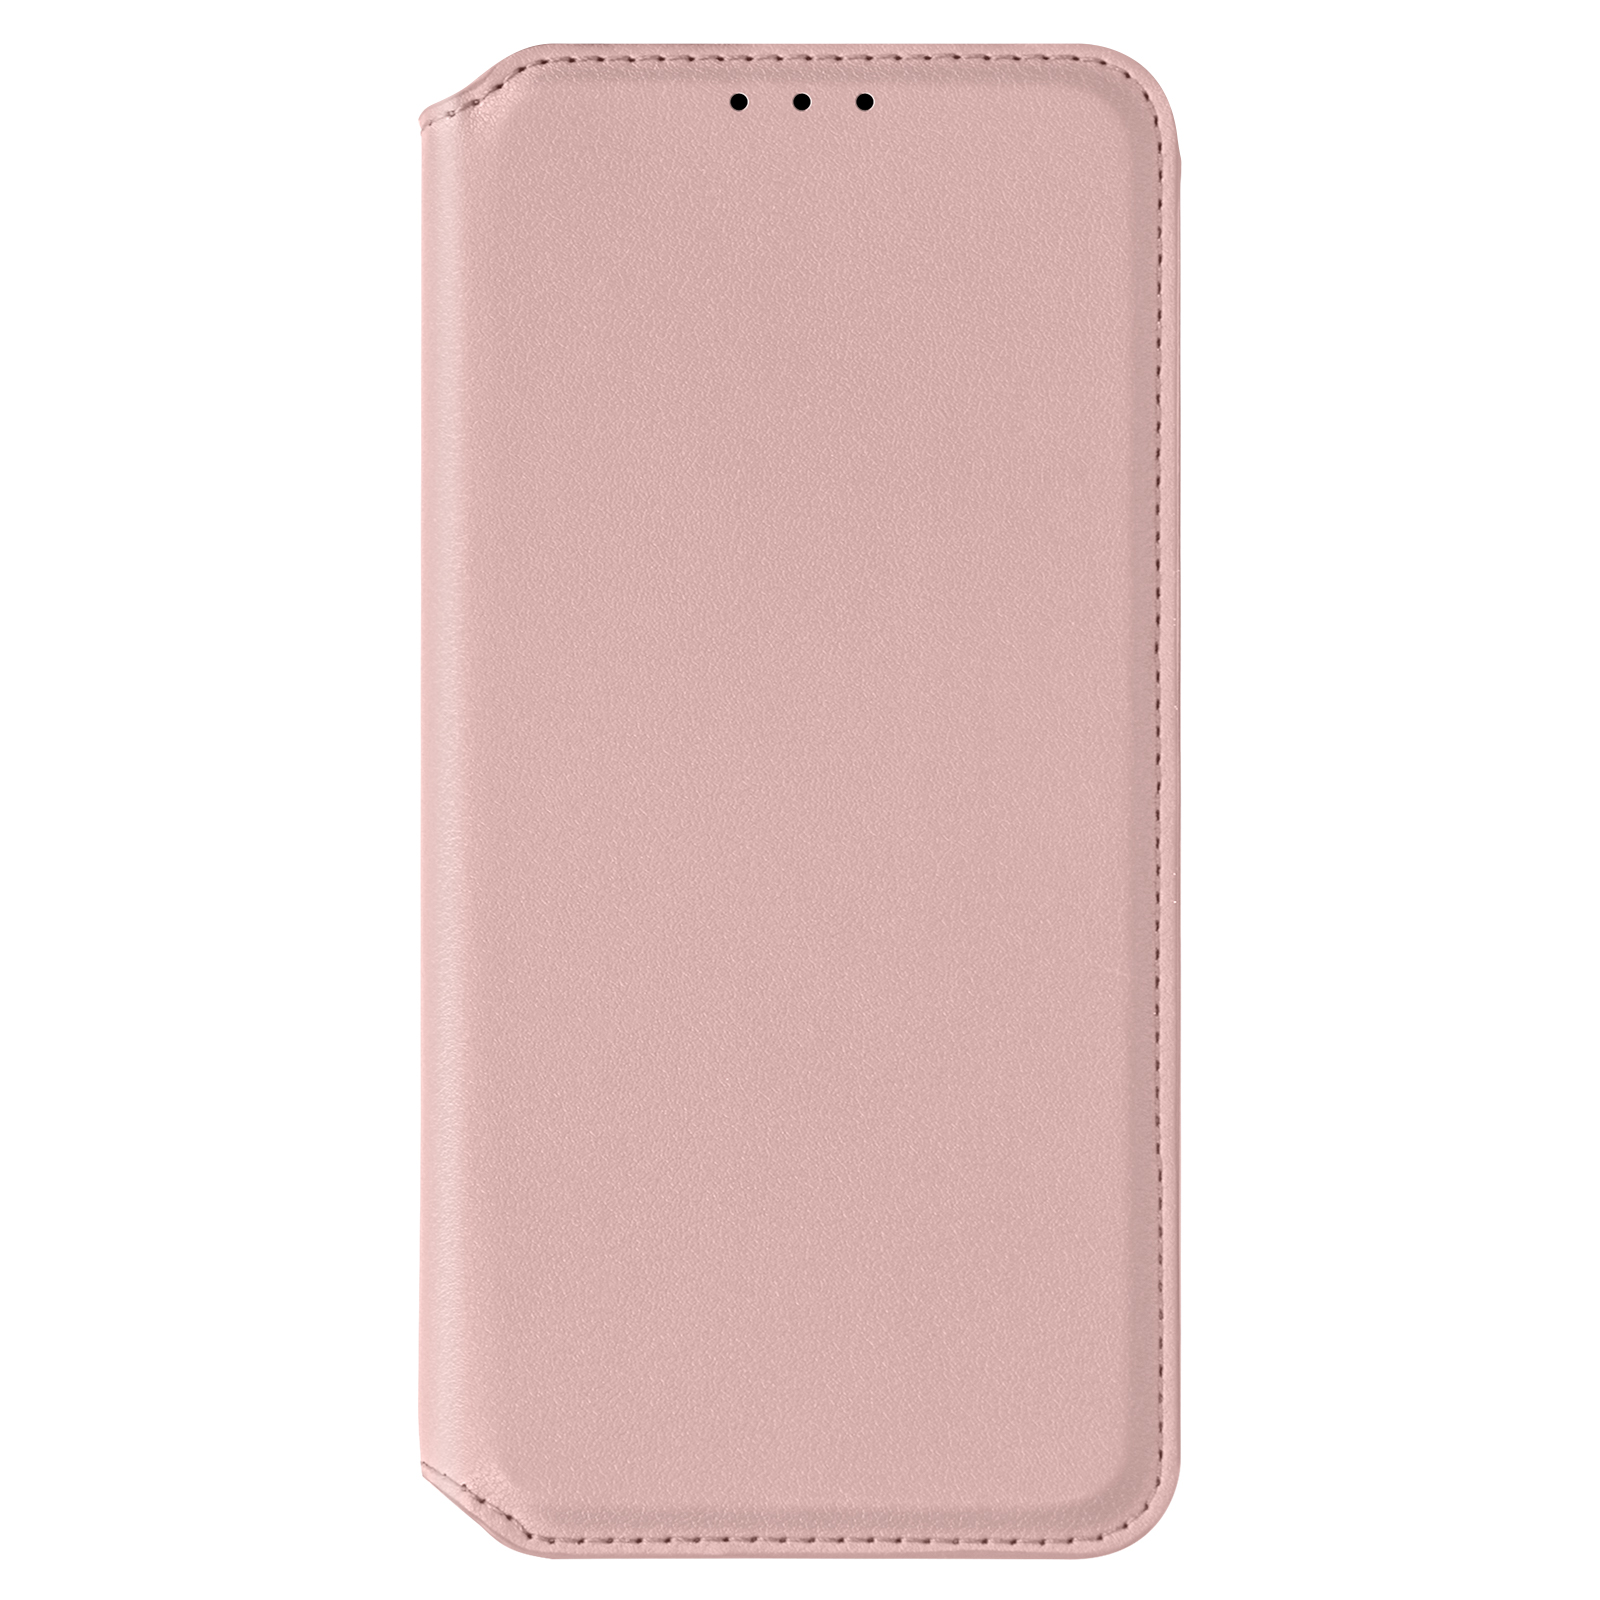 Magnetklappe Series, S, Classic mit AVIZAR Edition, P Rosegold Bookcover, Huawei, Smart Backcover